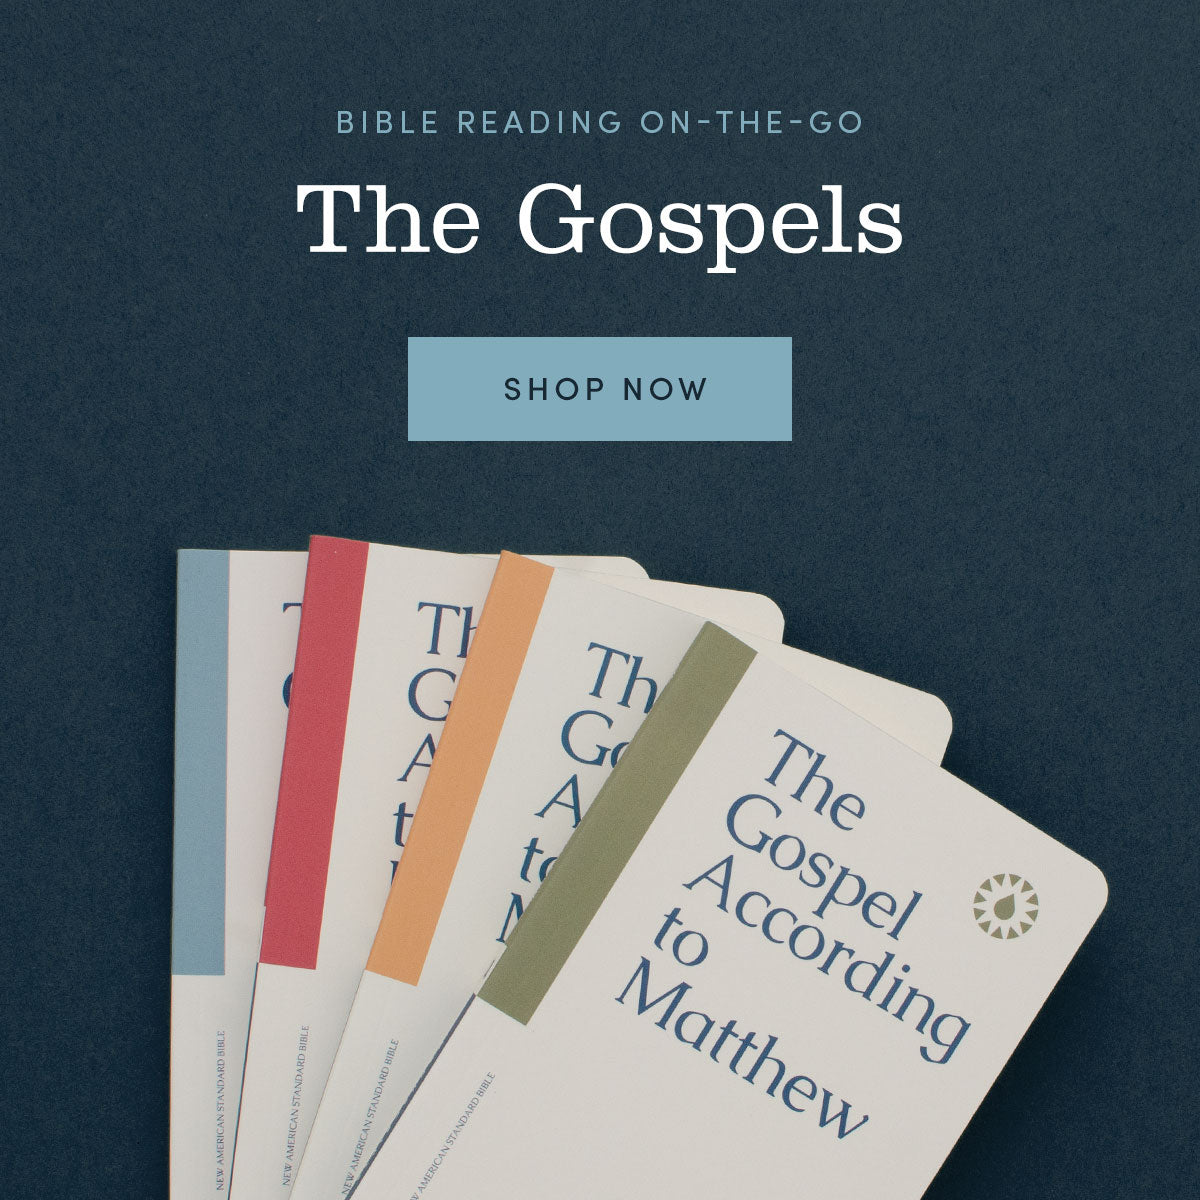 Bible reading on-the-go. The Gospels pocket-sized Bible books. Shop now.